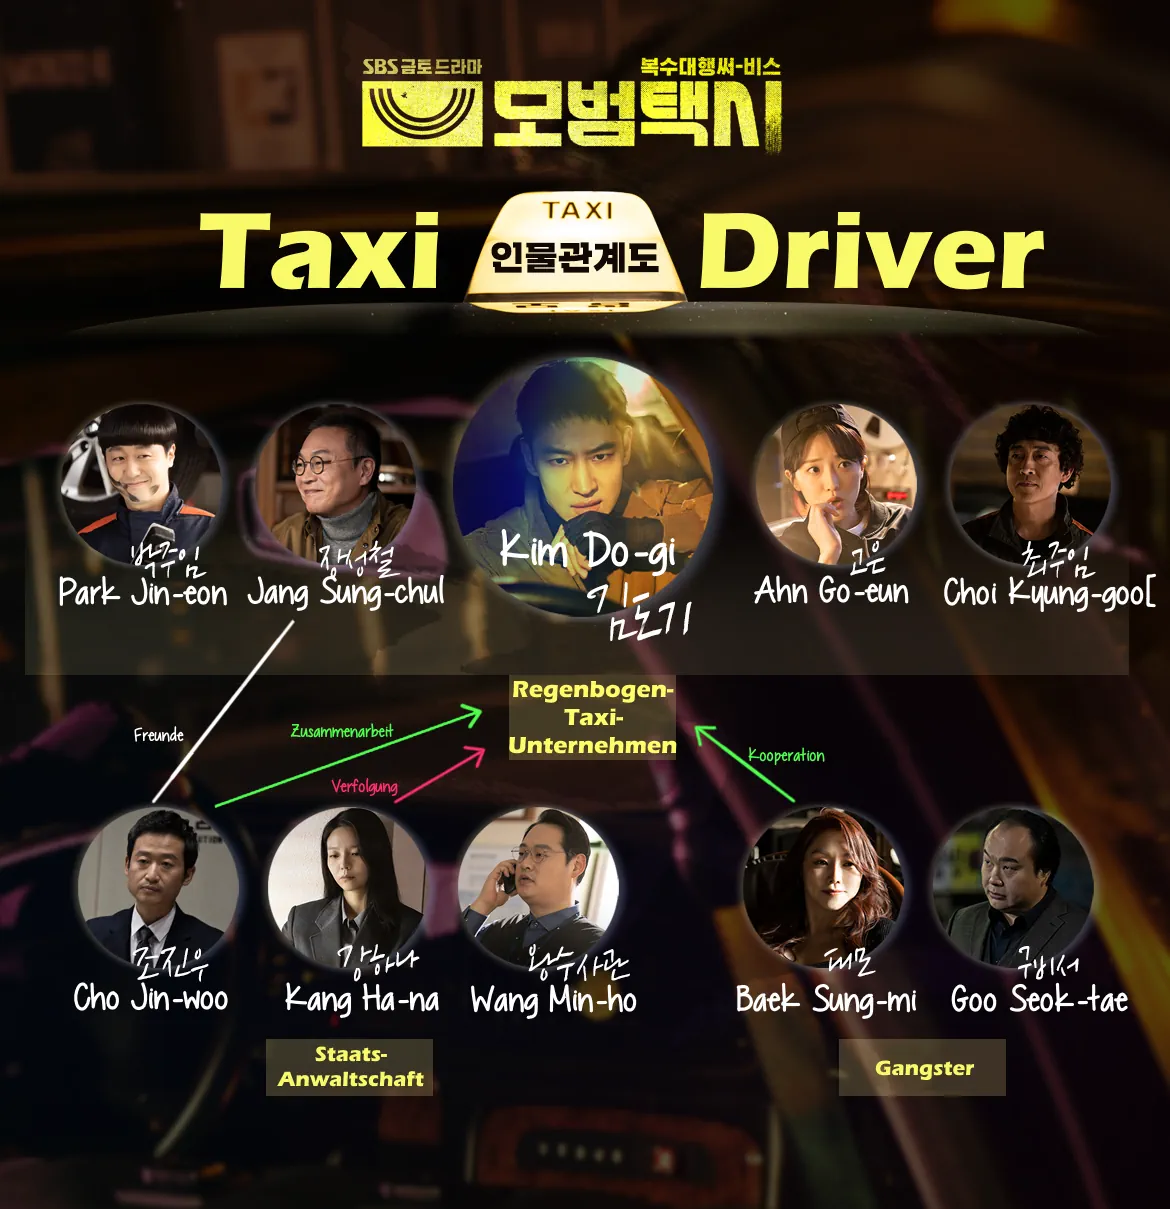 Taxi Driver who is who